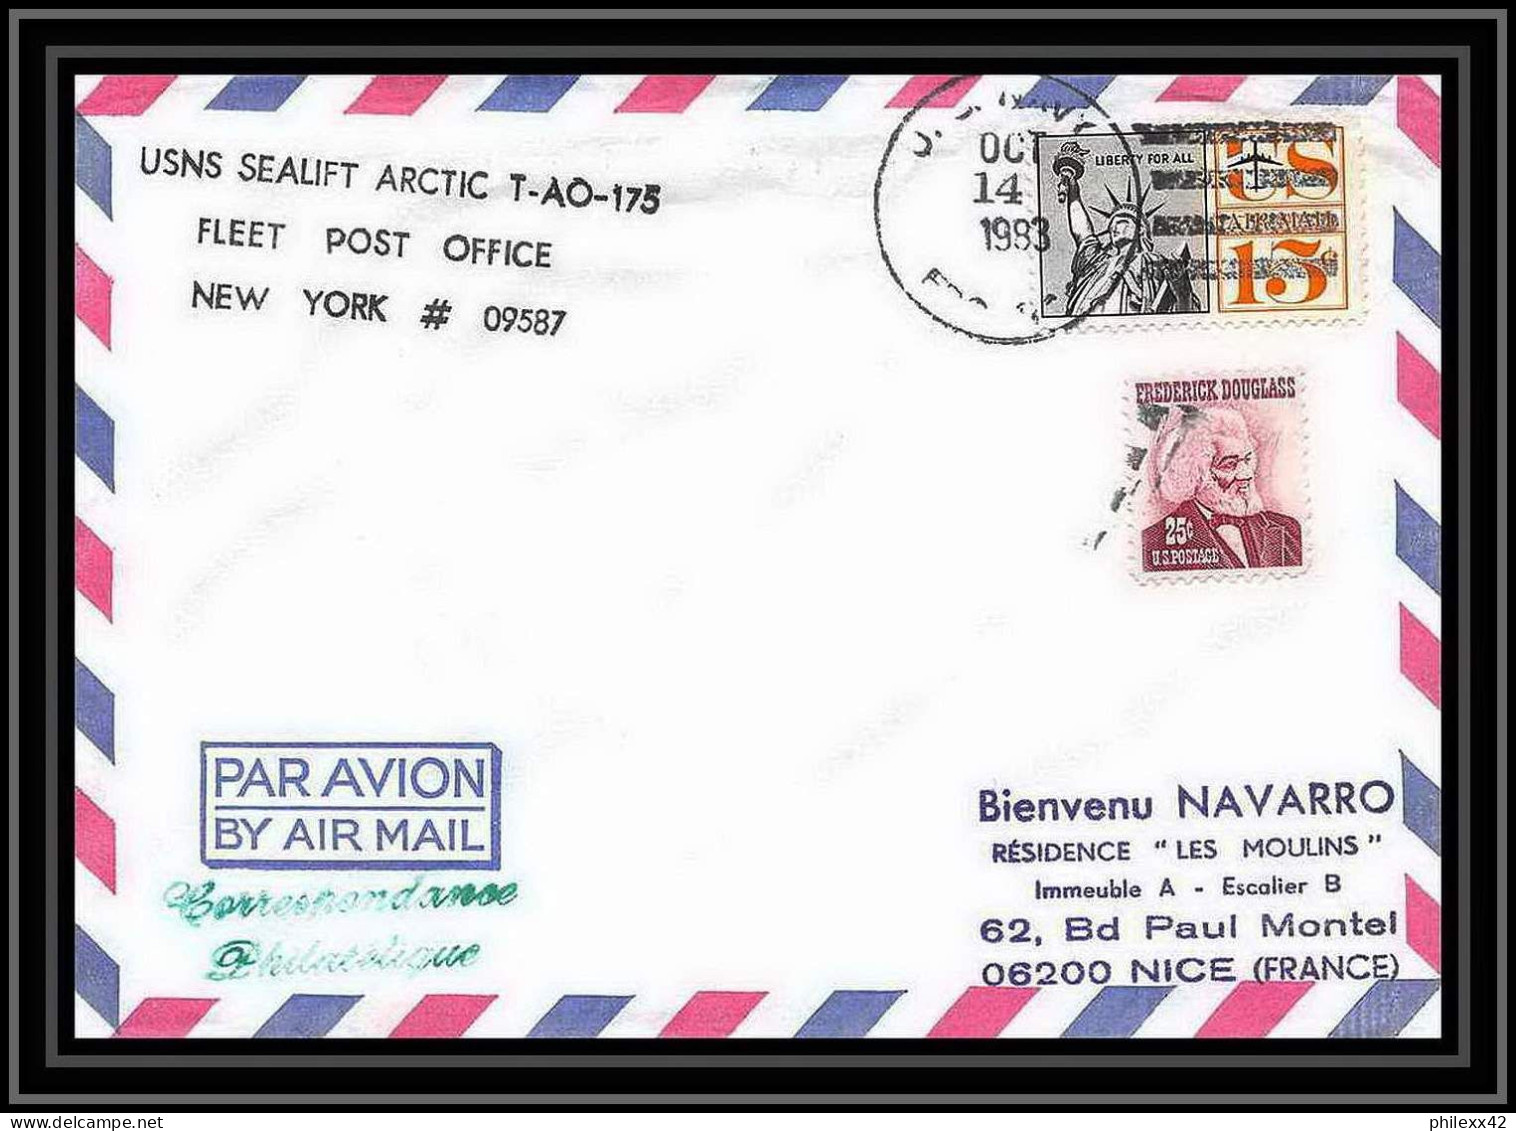 2004 Antarctic USA Lettre (cover) Usns Sealift Arctic T-ao-175 14/10/1983 - Research Stations